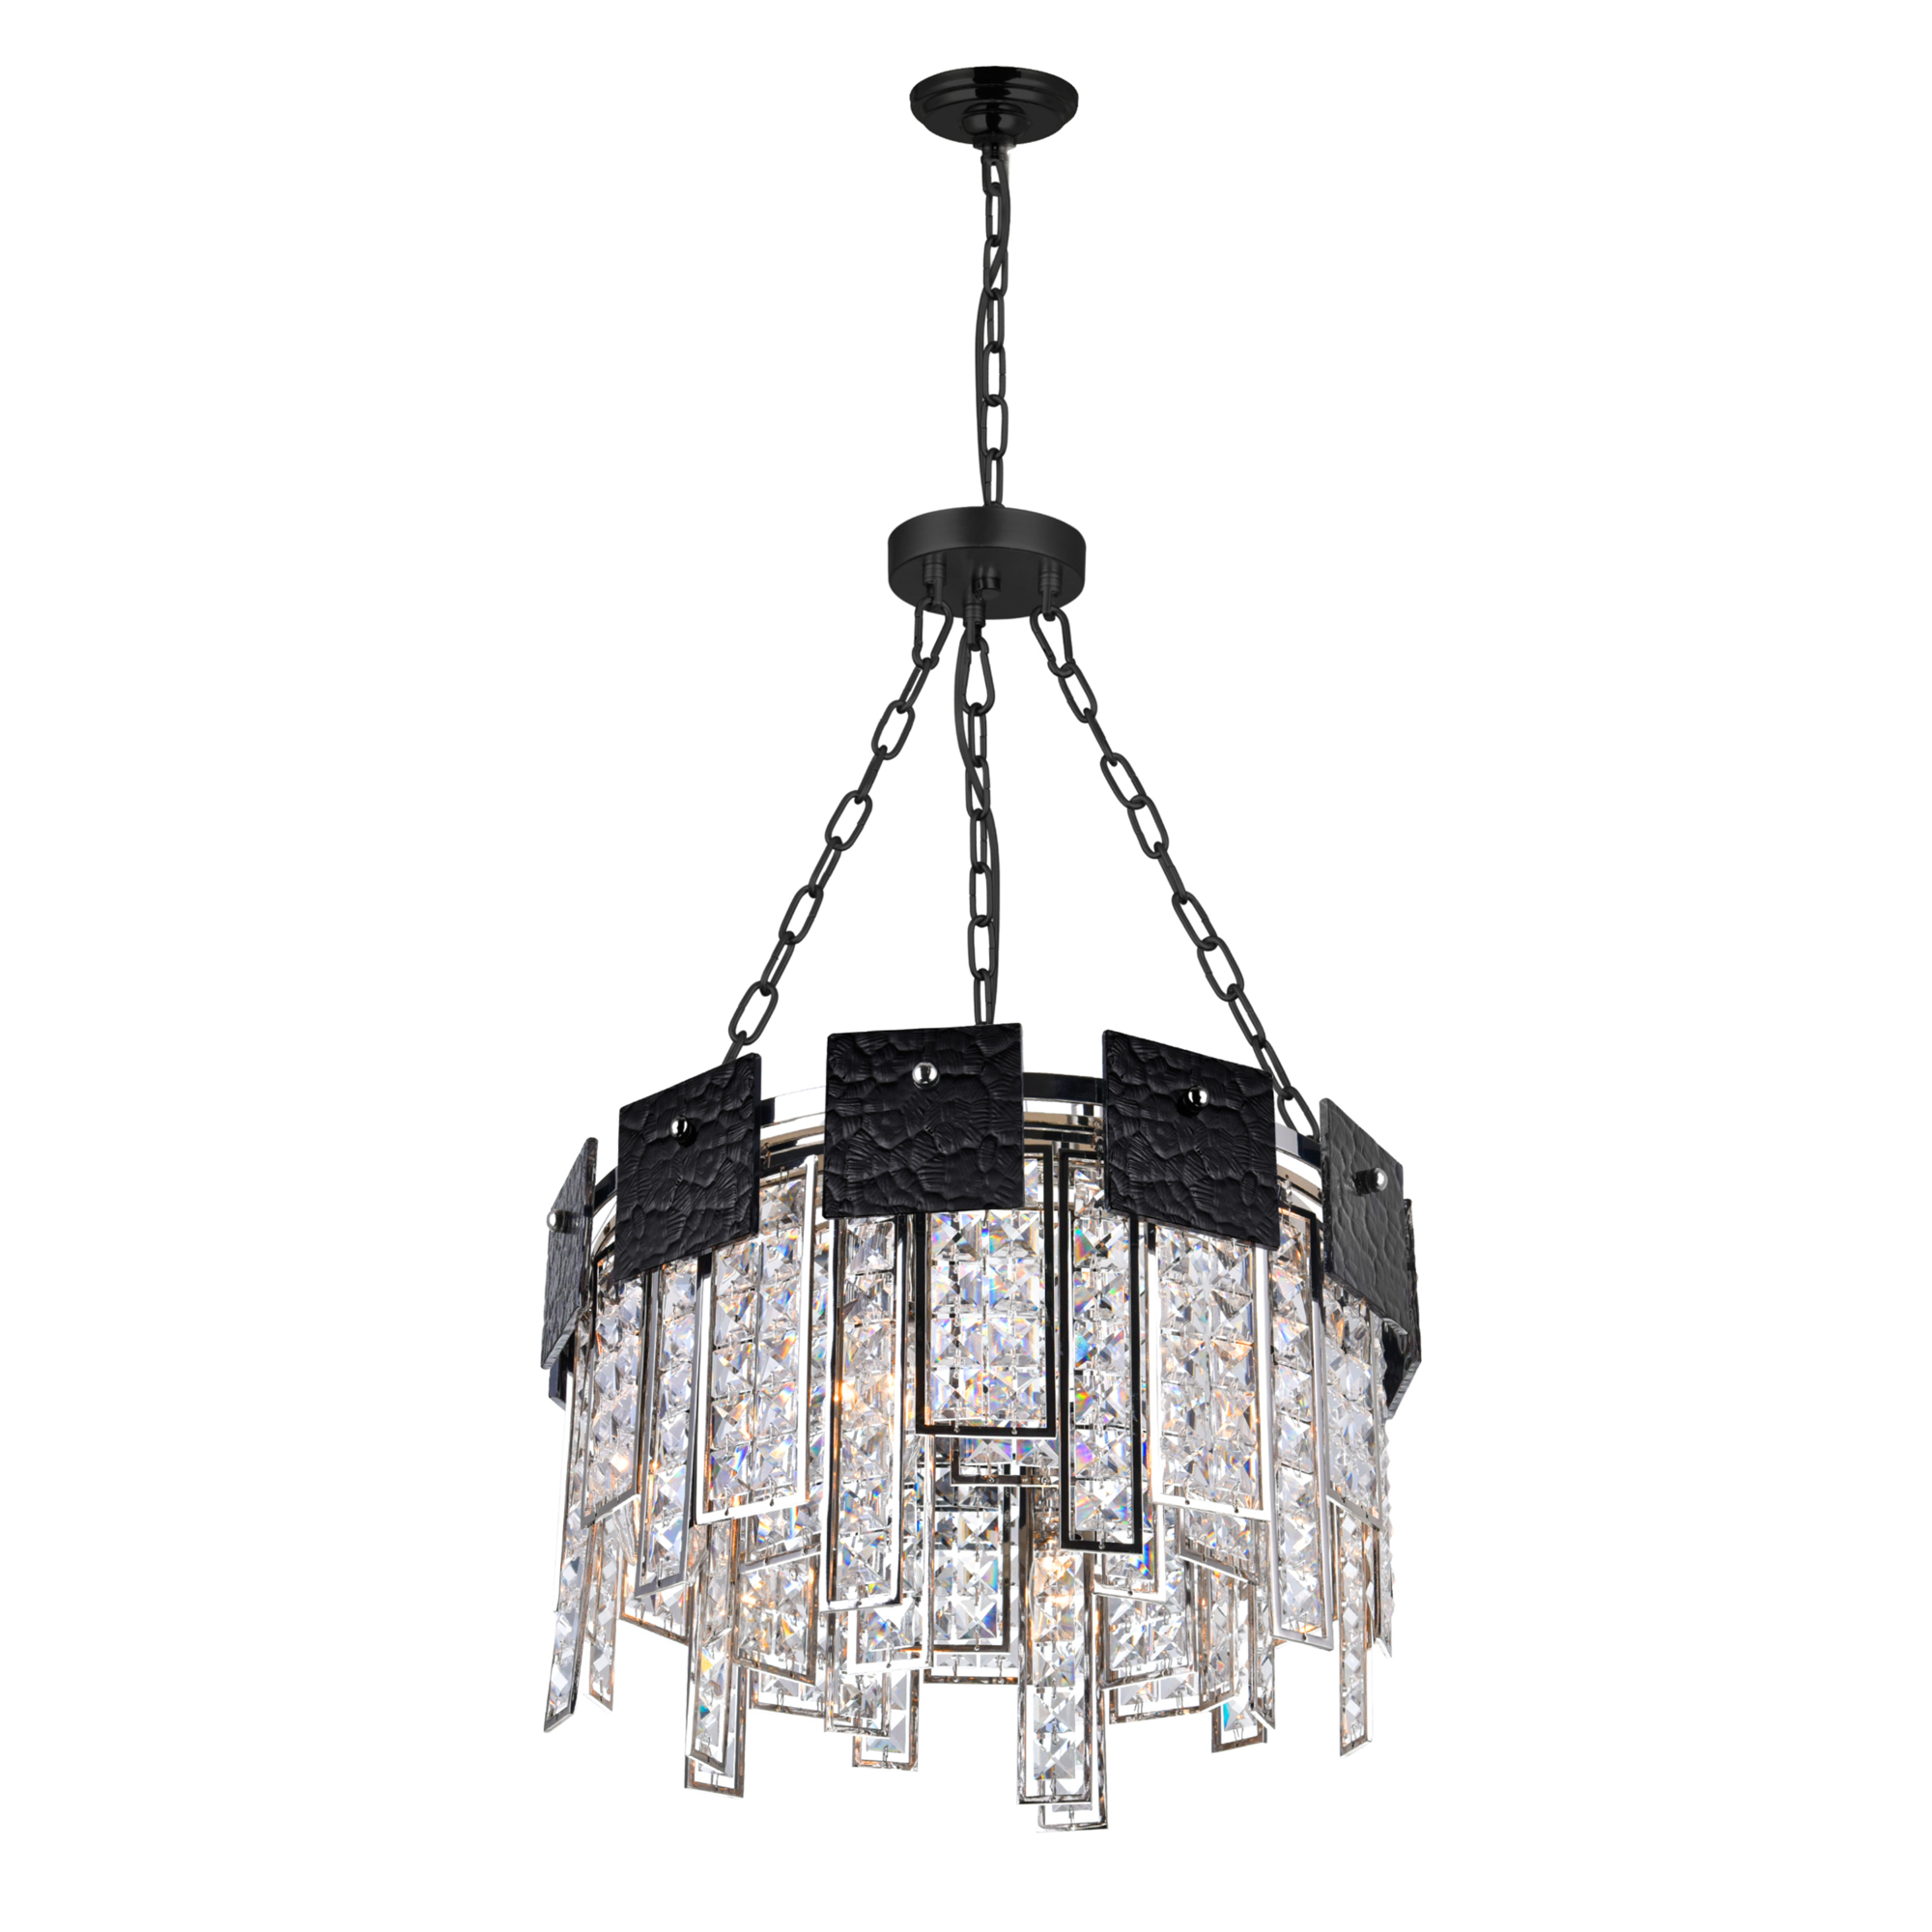 Glacier 6 Light Down Chandelier With Polished Nickel Finish